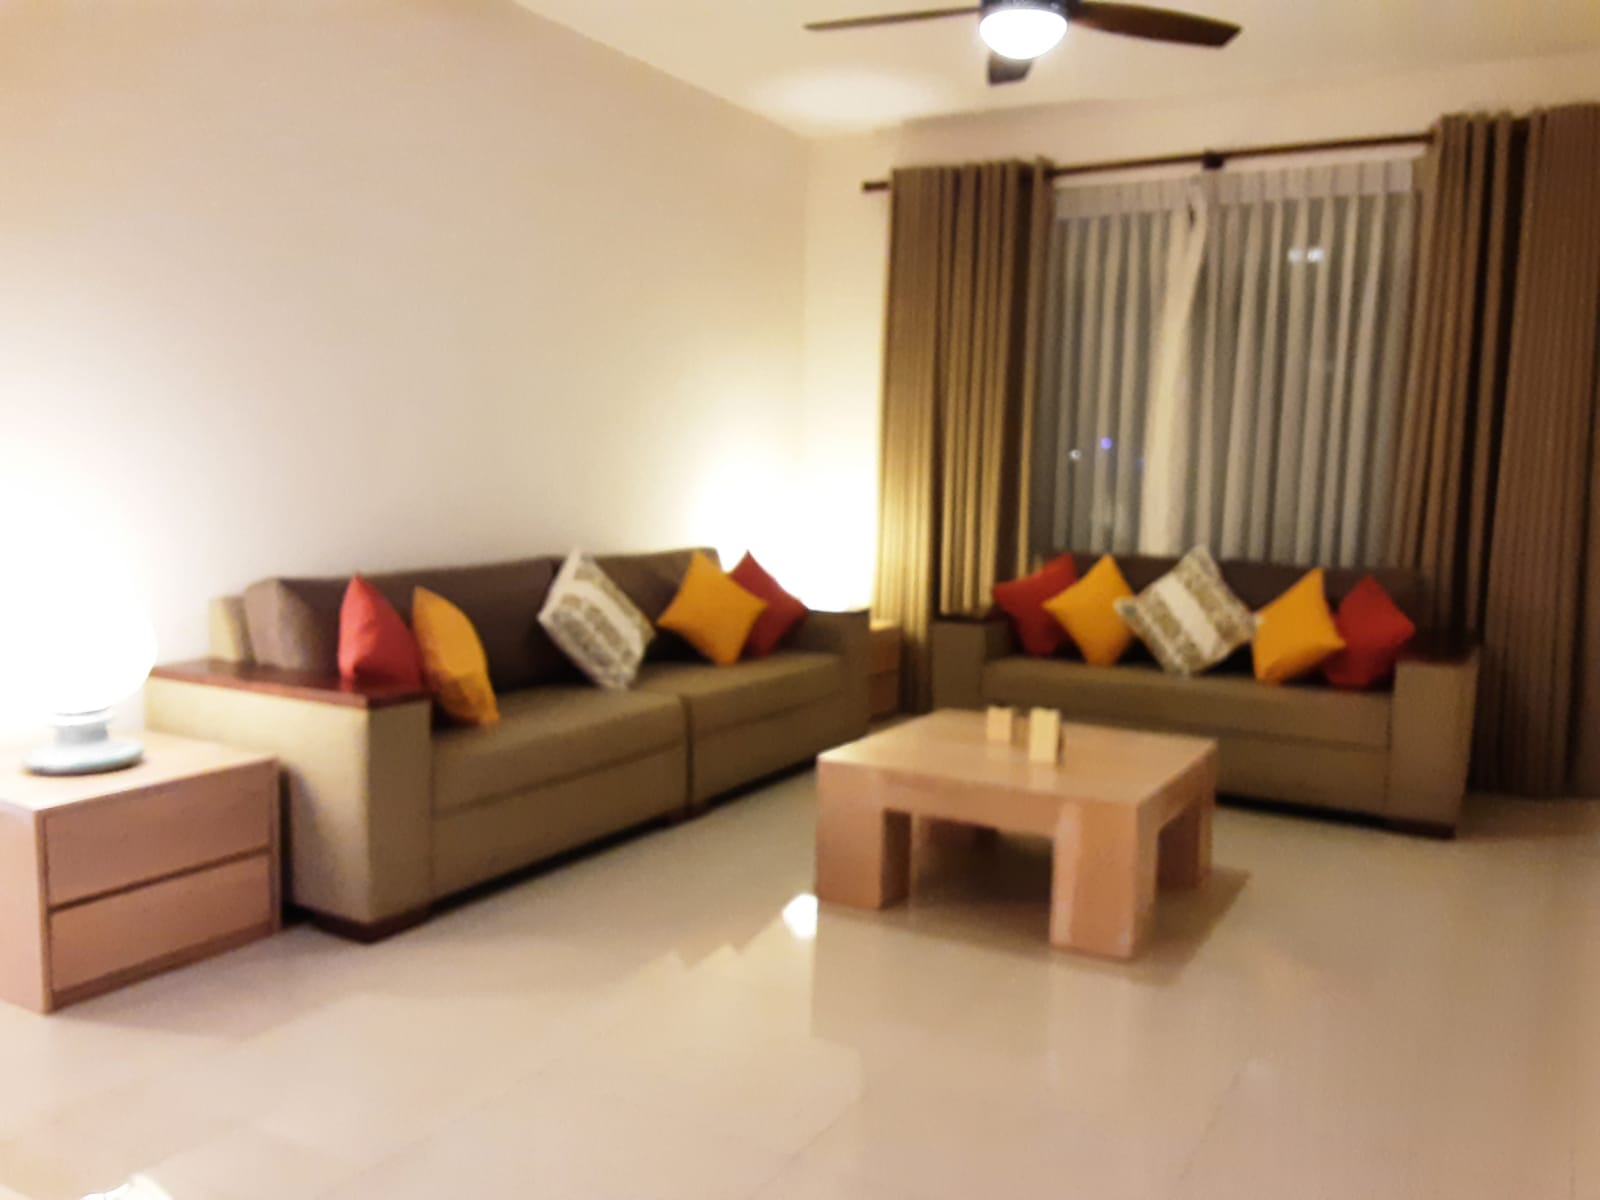 Fully Furnished Spacious 4 BR Apartment on Rent at Havelock City - Colombo  05. - Apartments.lk